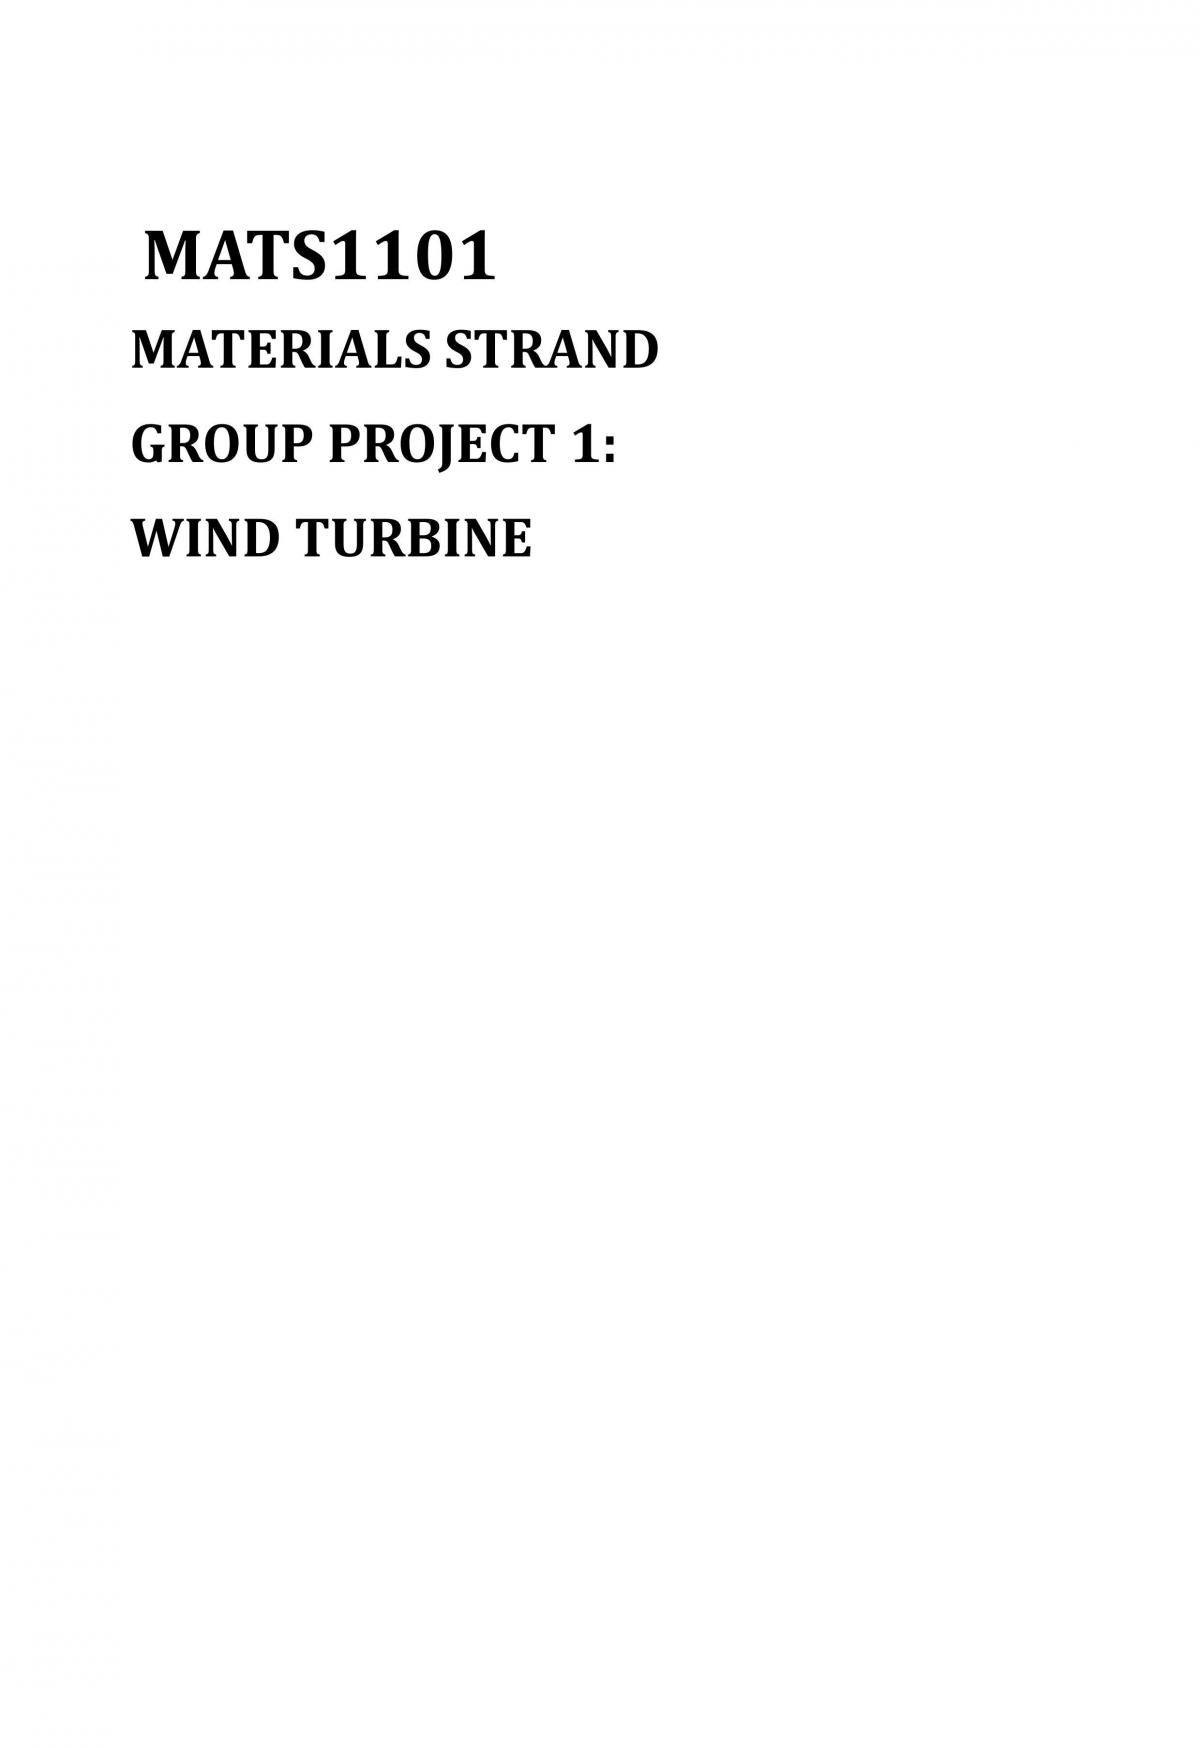 This is the Full Report of Group Project 1, The Topic is Wind Turbine and got 85/100 of the Marks - Page 1